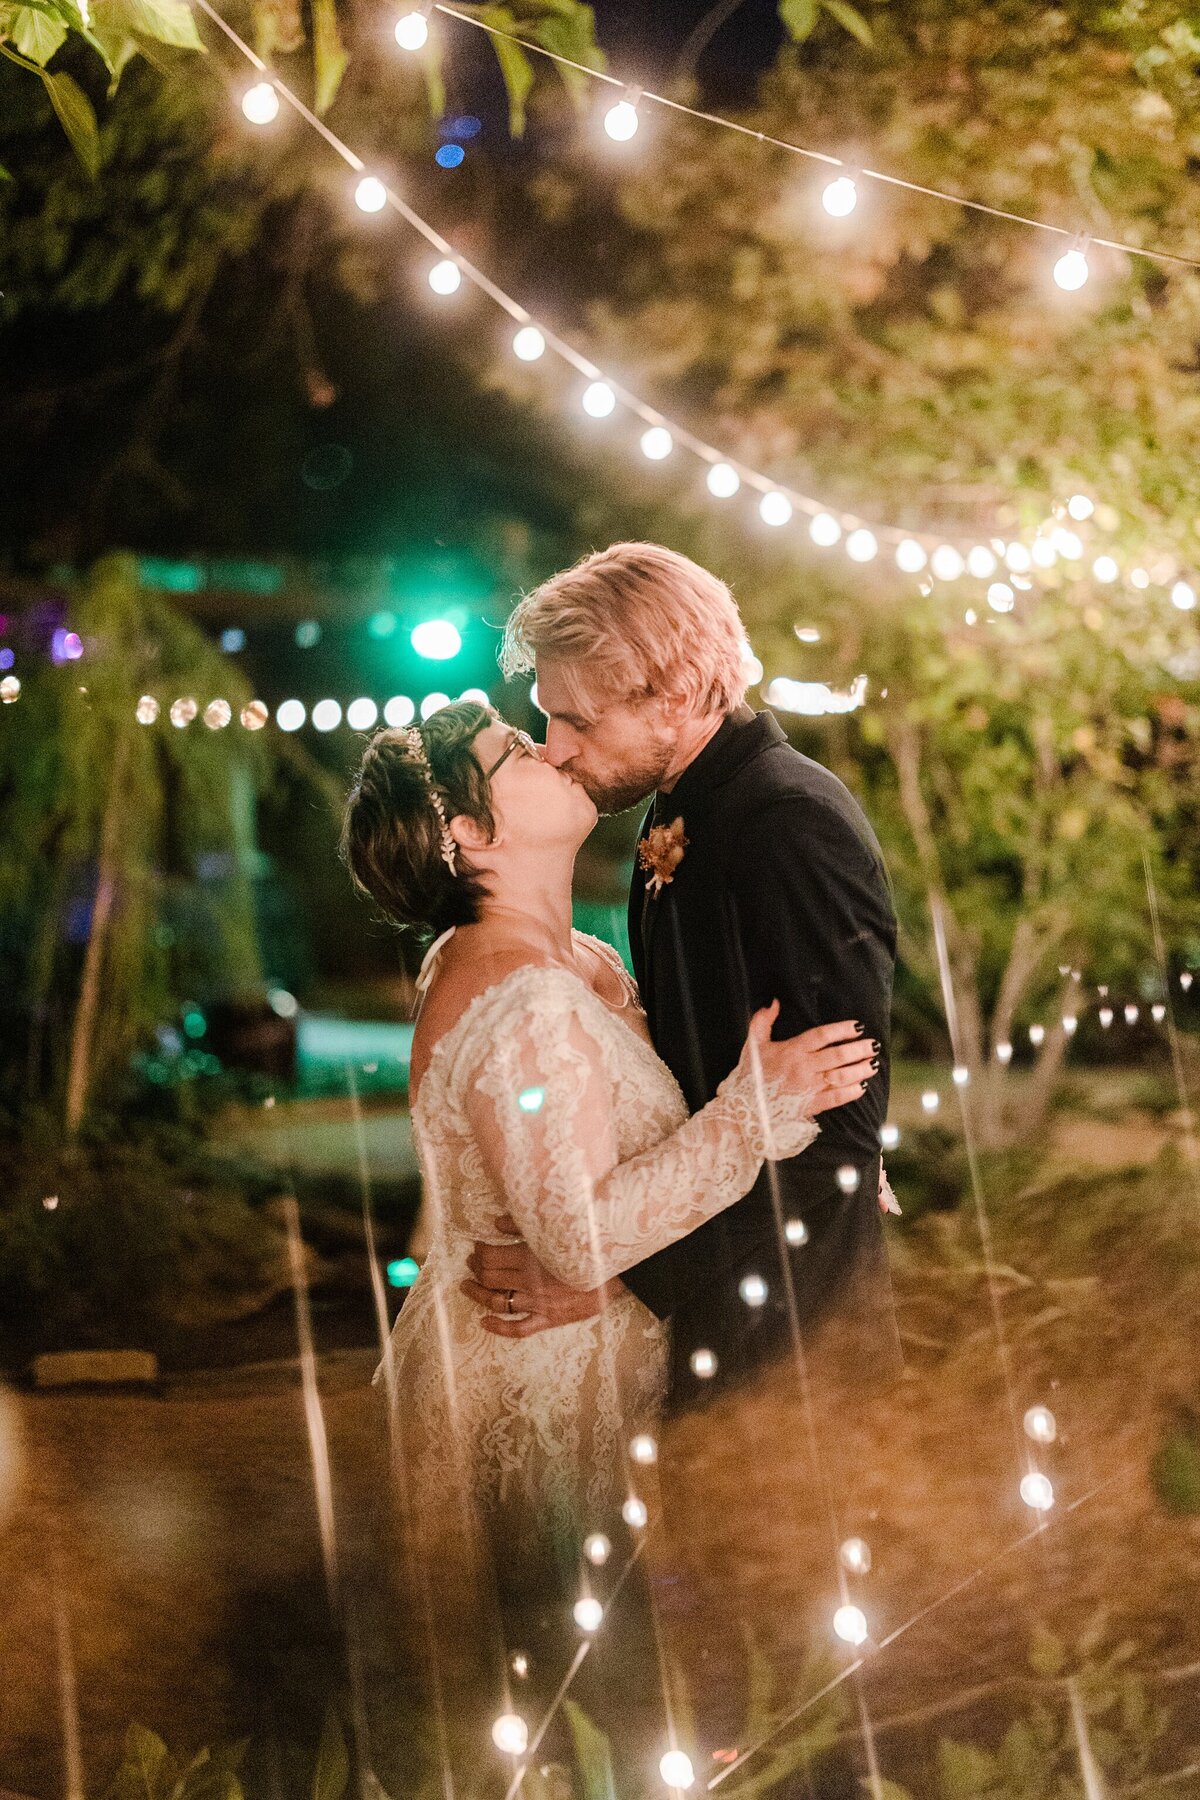 Portrait of a bride and groom sharing a kiss after their wedding ceremony in Dallas, Texas. The bride is on the left and is wearing a long sleeve, intricate, white dress and floral headband. The groom is on the right and is wearing a black suit with a boutonniere. They are framed by many strings of cafe lights and trees.